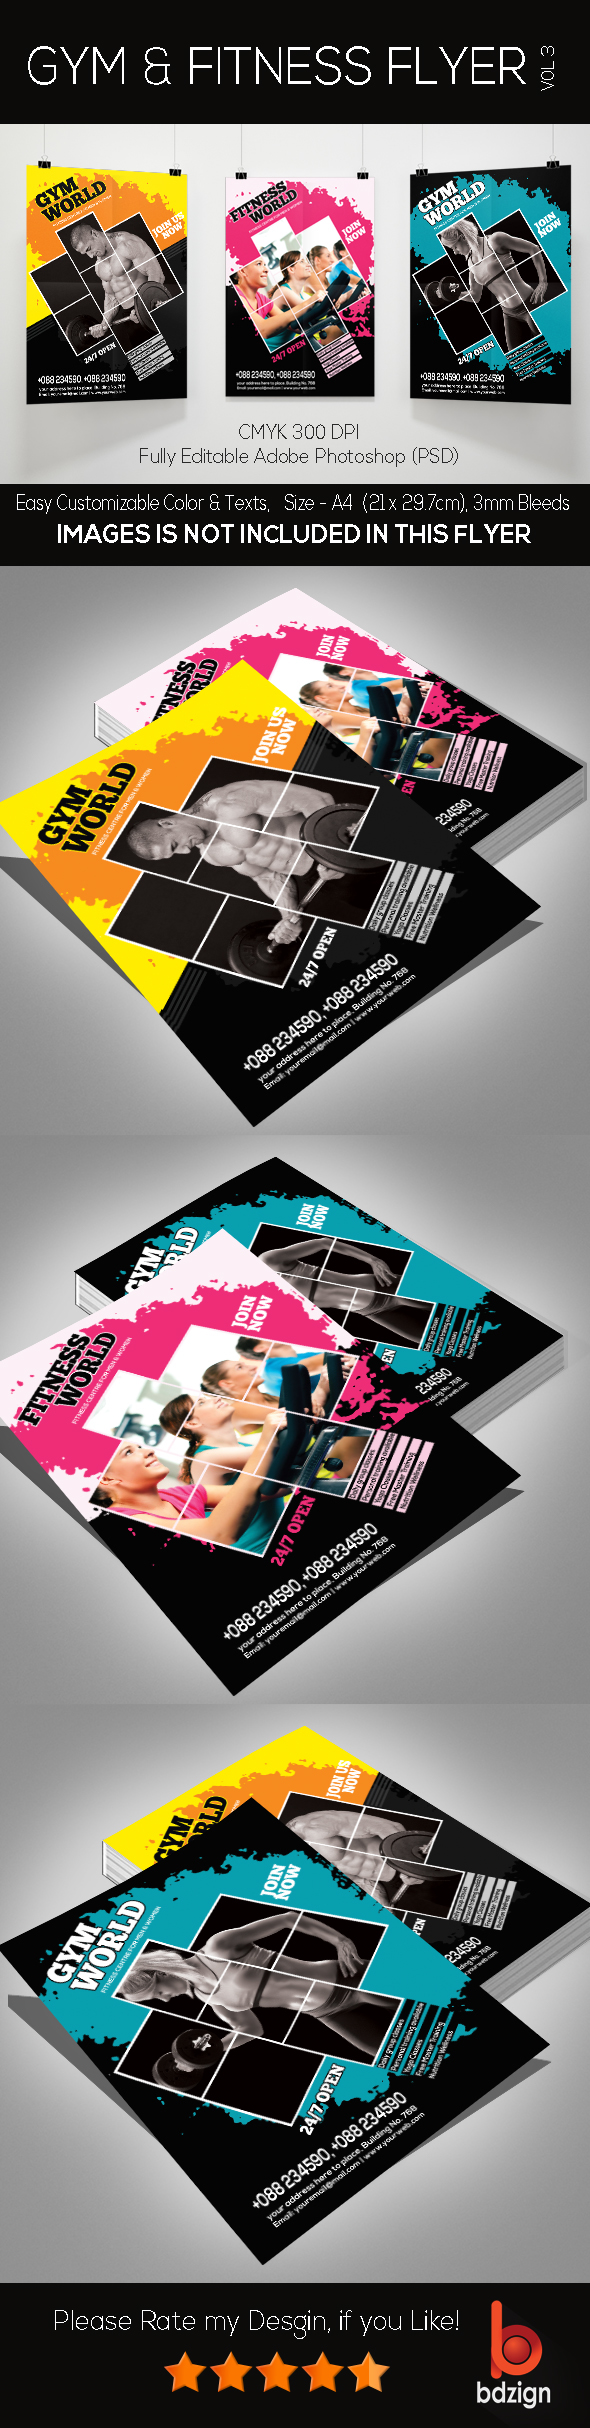 Aerobics ATHLETS beauty body business club commercial corporate creative exercise fitness flyer fresh generic grunge gym flyer